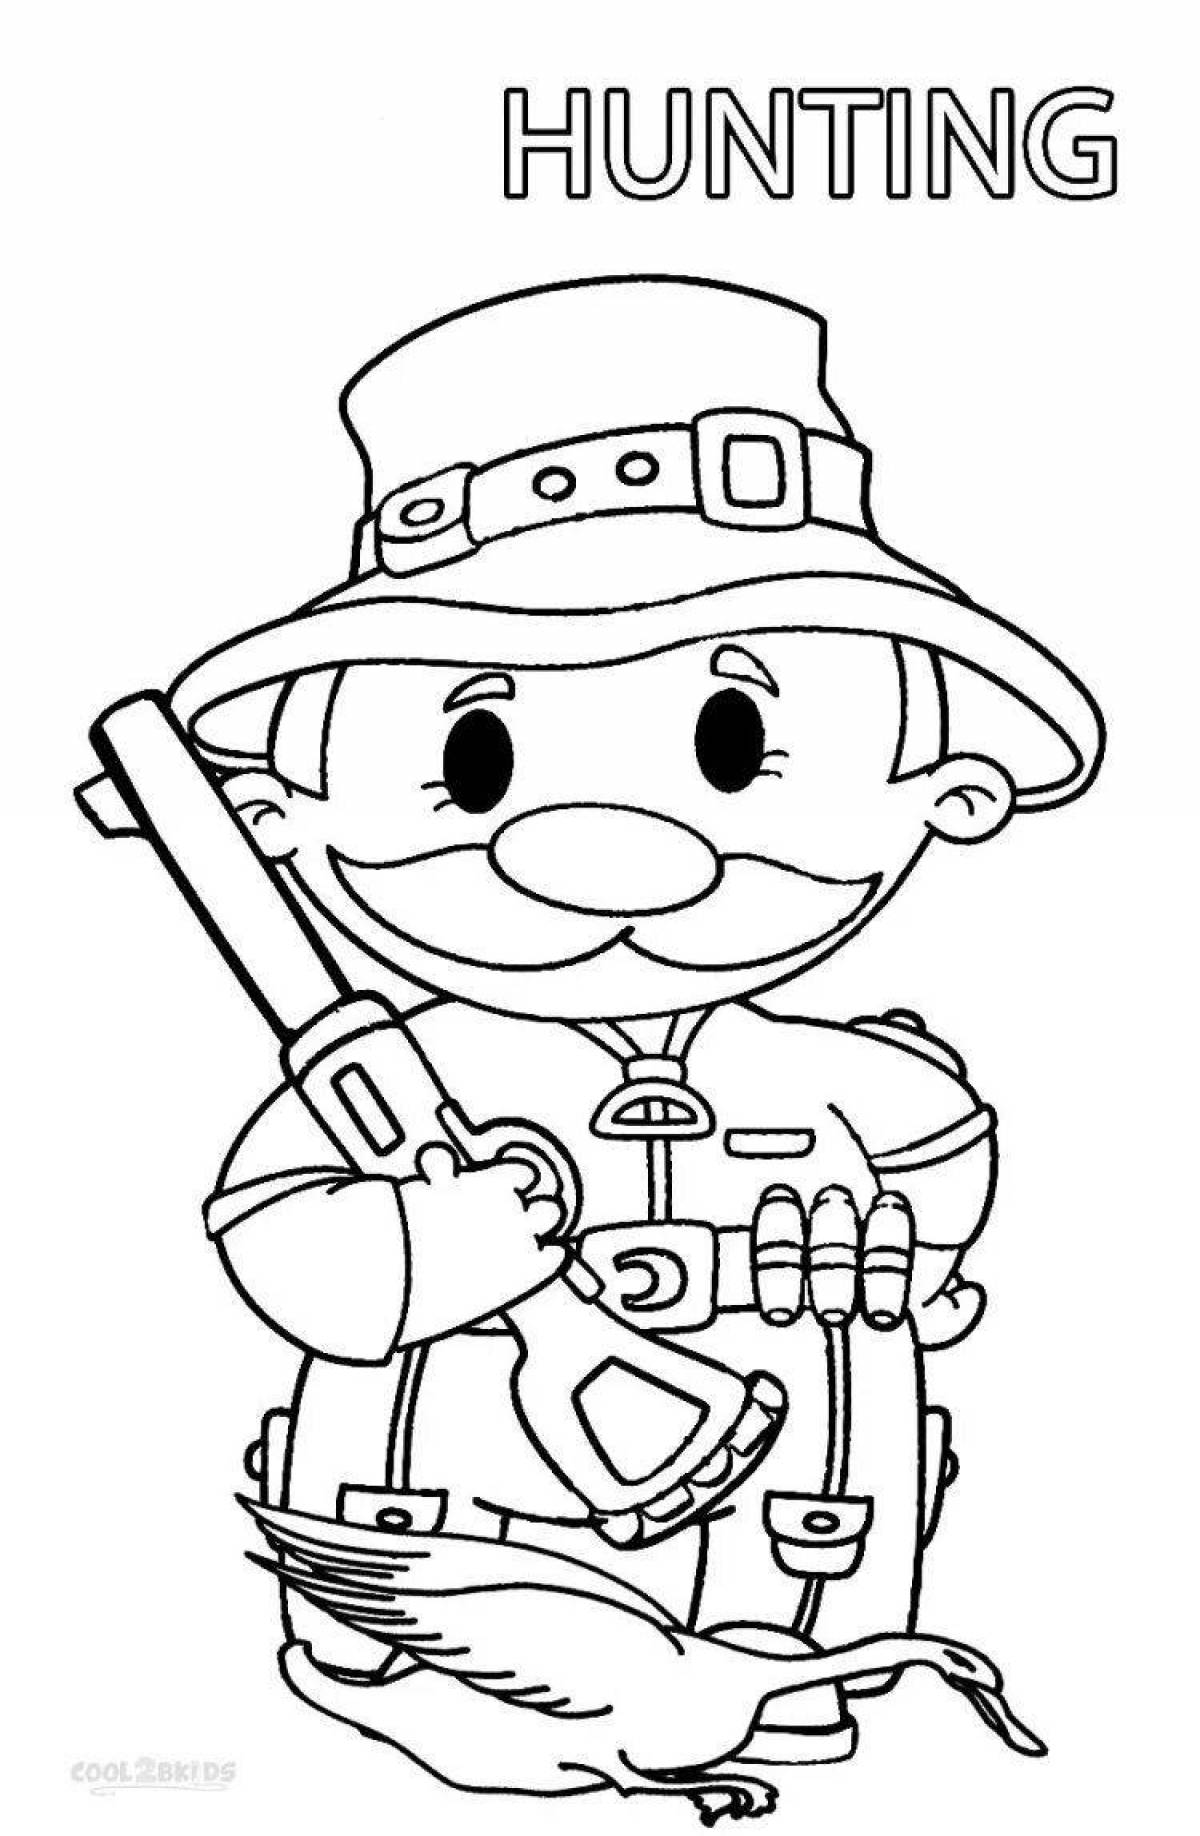 Coloring mighty hunter with a gun